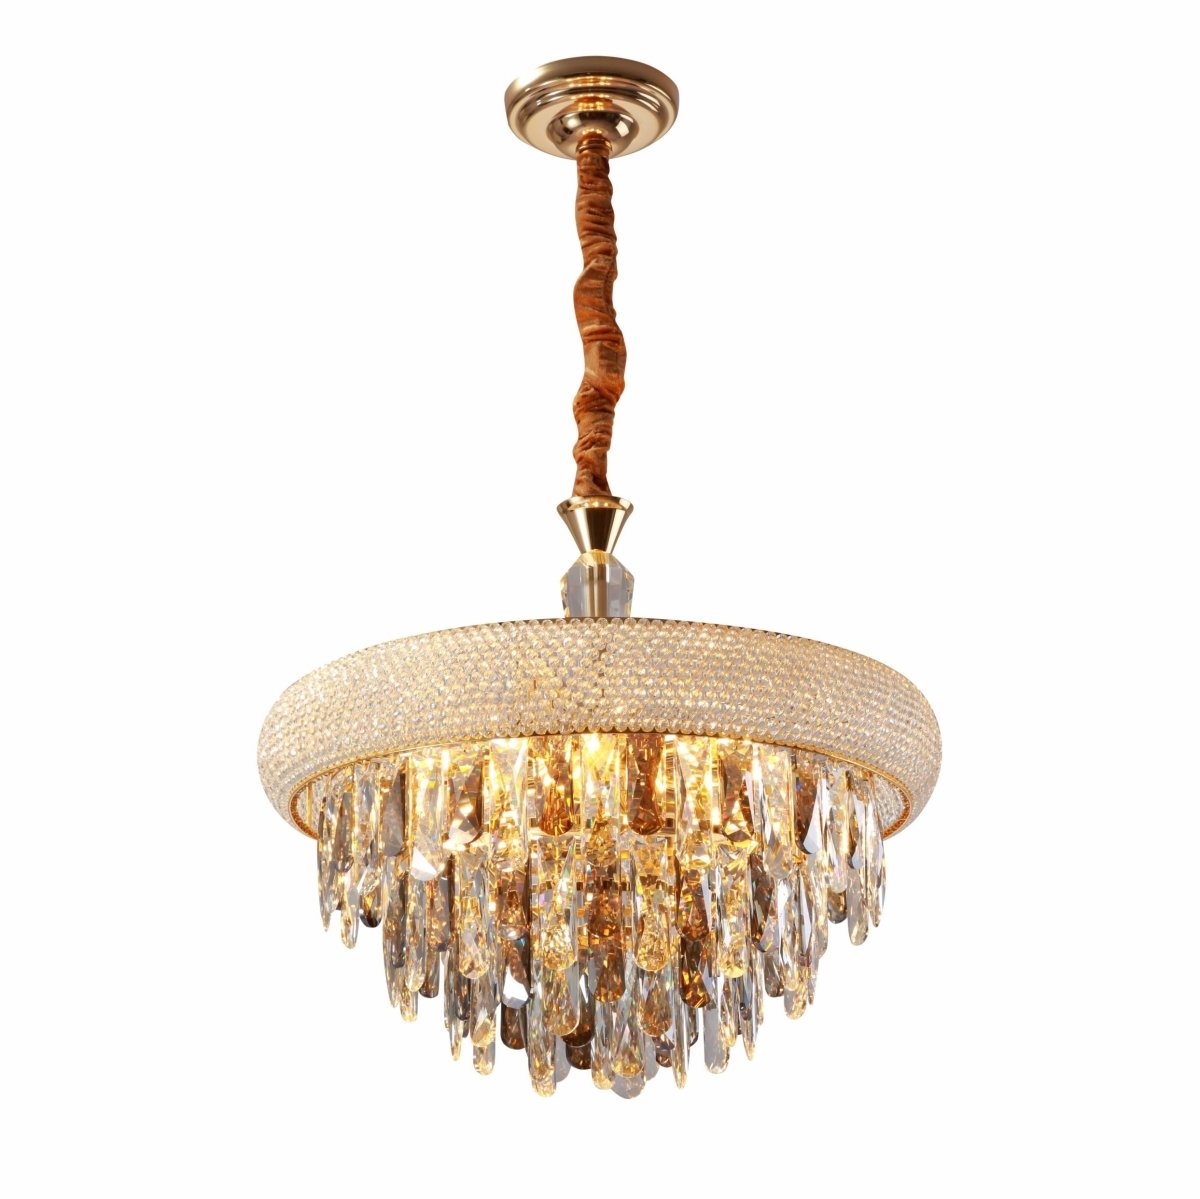 Main image of S-Gold Metal Crystal Chandelier D600 with 11xE14 Fitting | TEKLED 158-19862